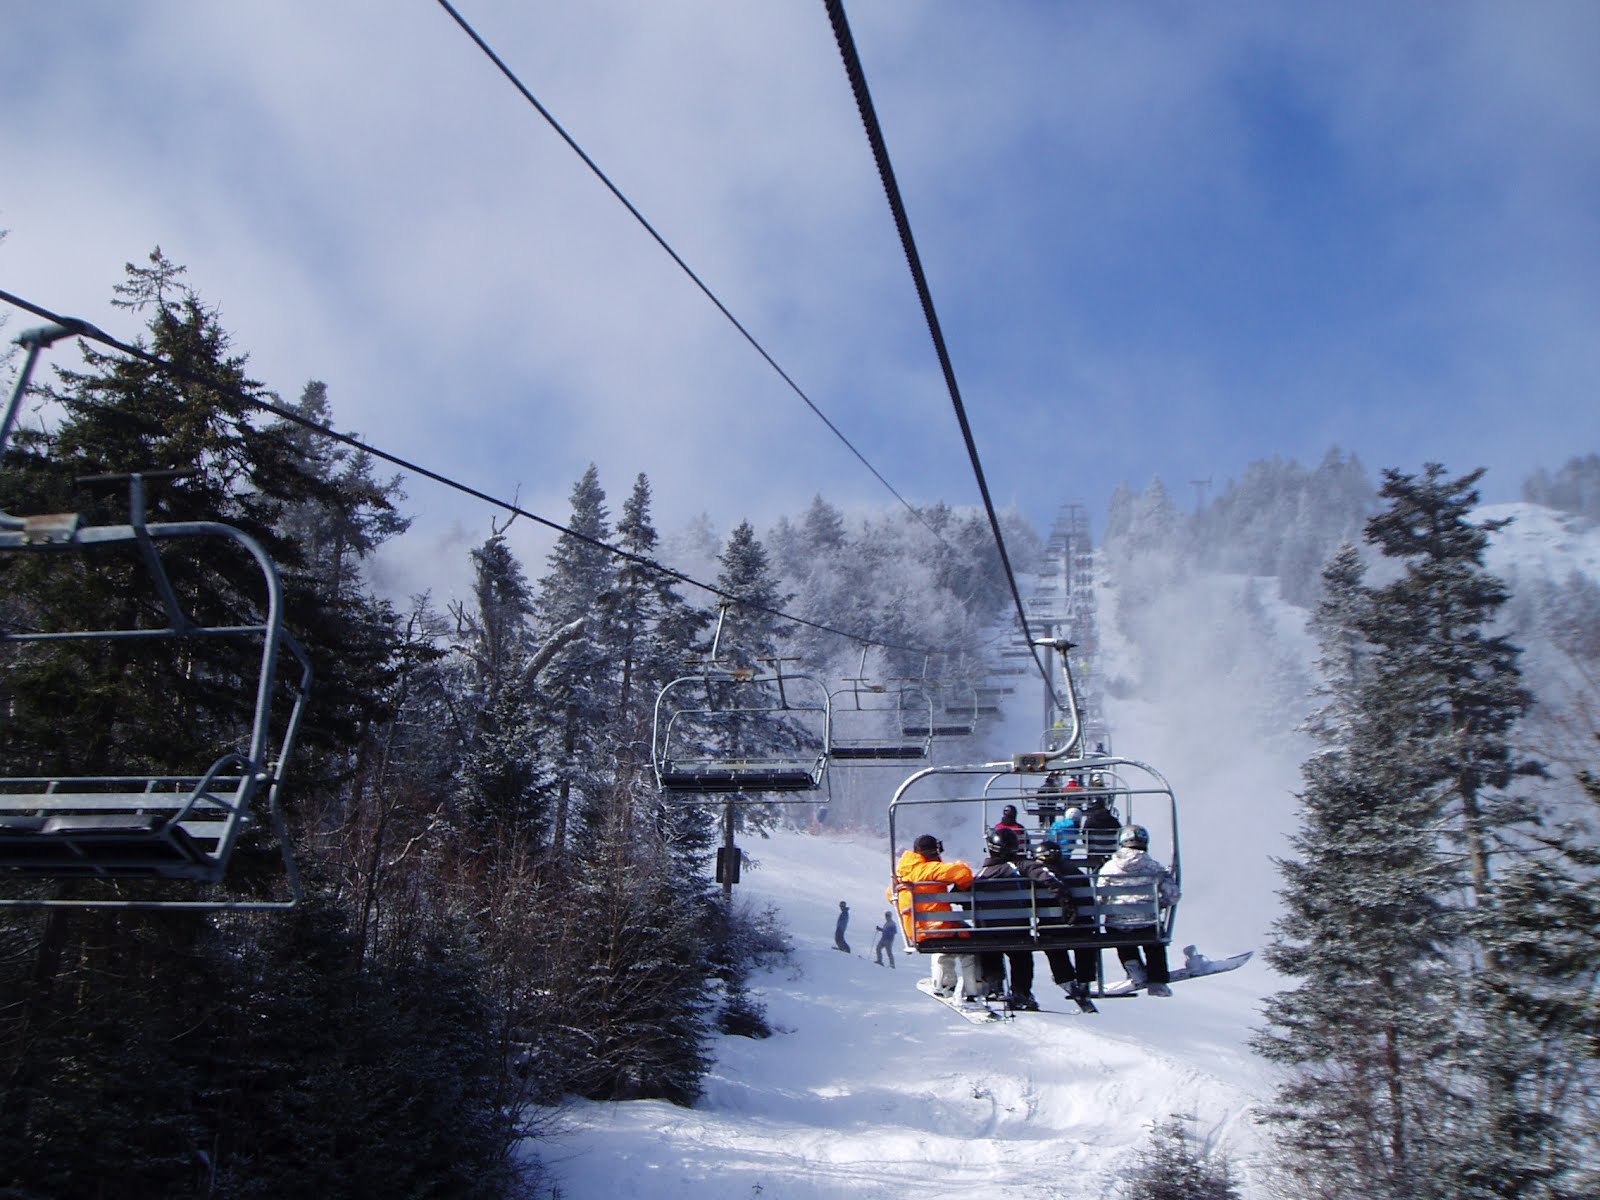 Gore's Straightbrook chairlift on February 4, 2012